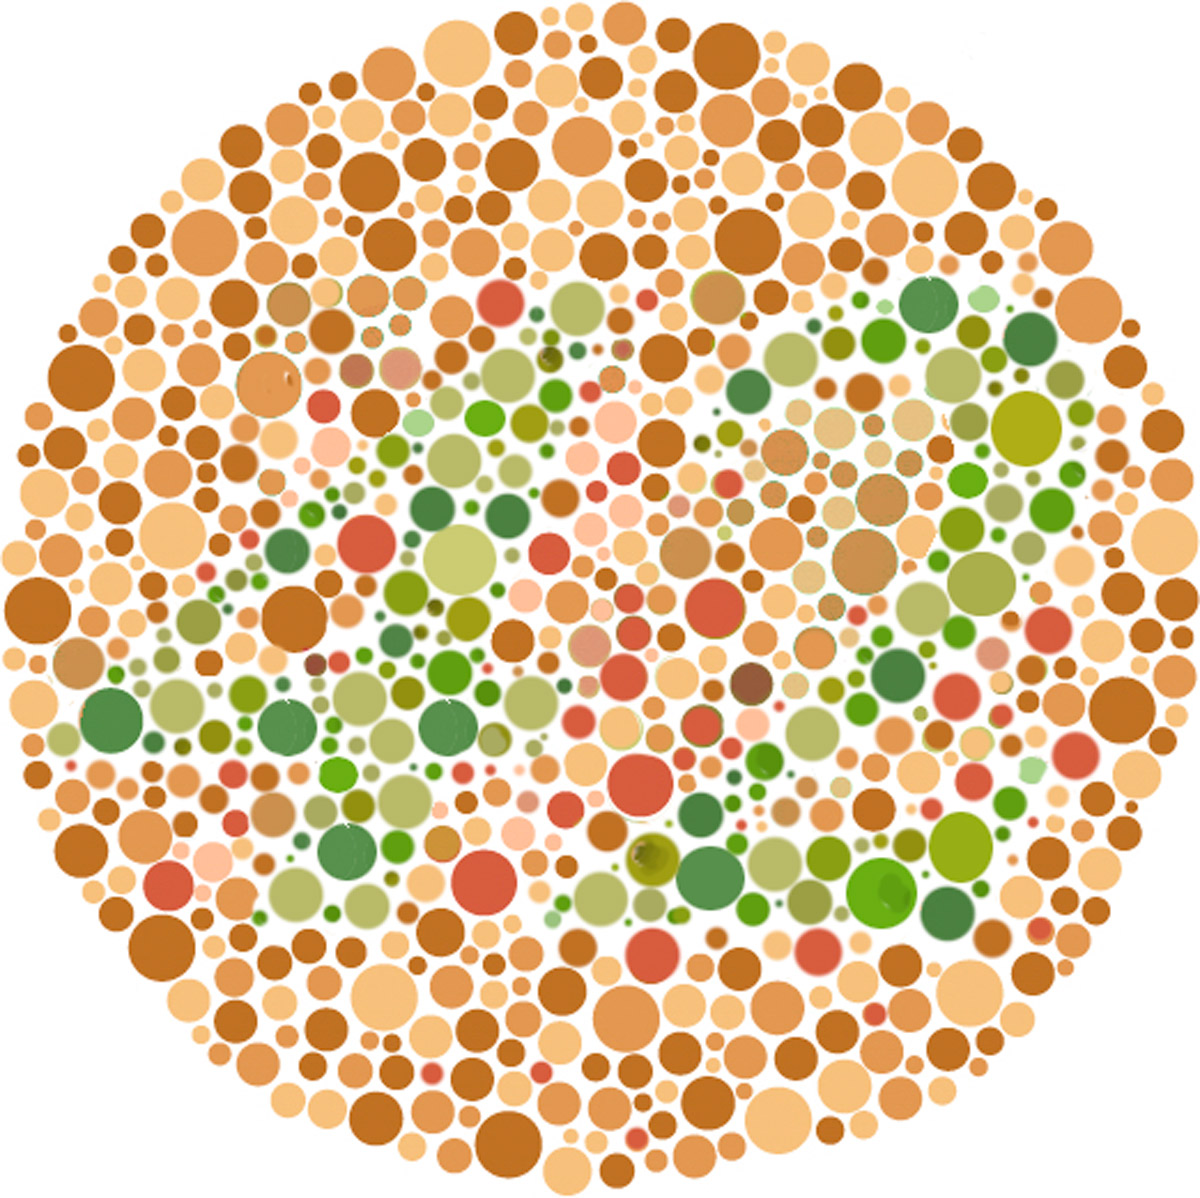 are-you-color-blind-siowfa16-science-in-our-world-certainty-and-controversy